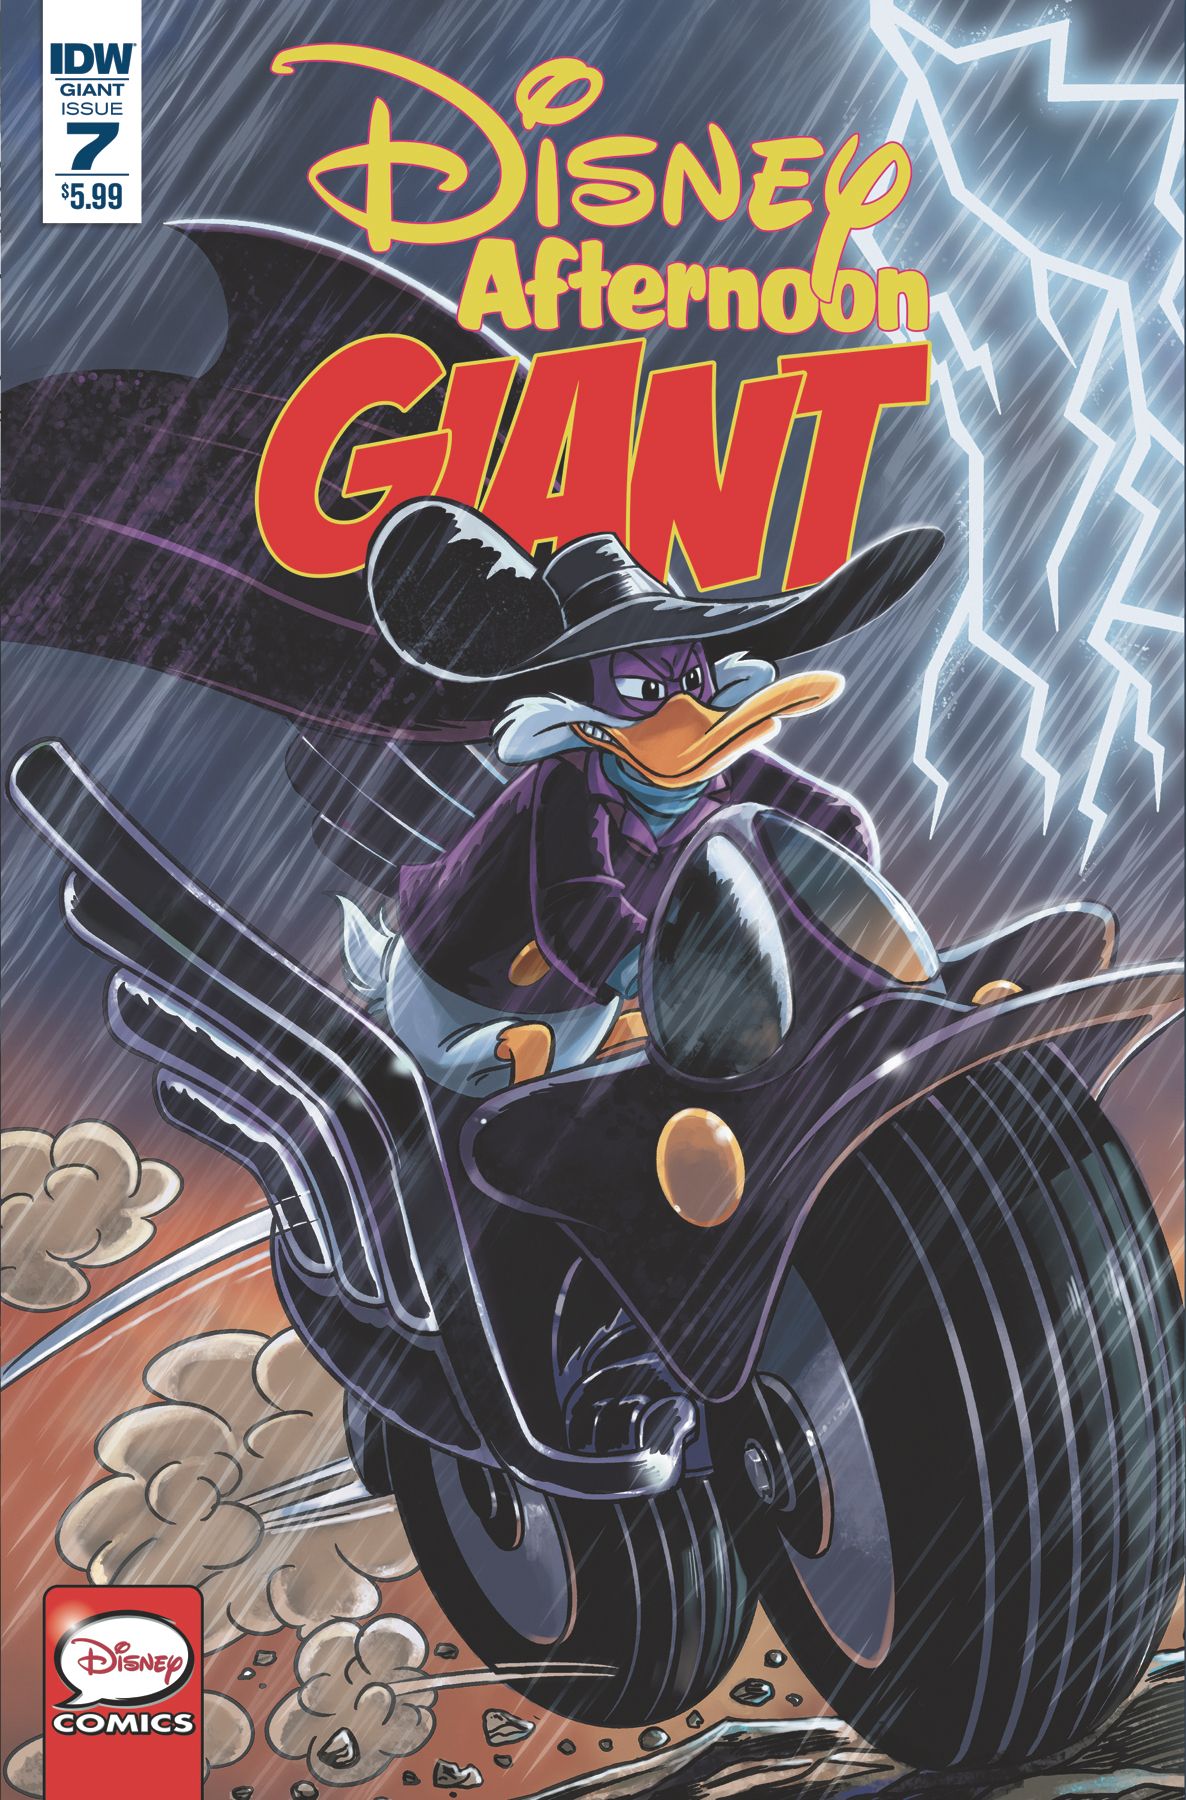 Disney Afternoon Giant #7 Comic